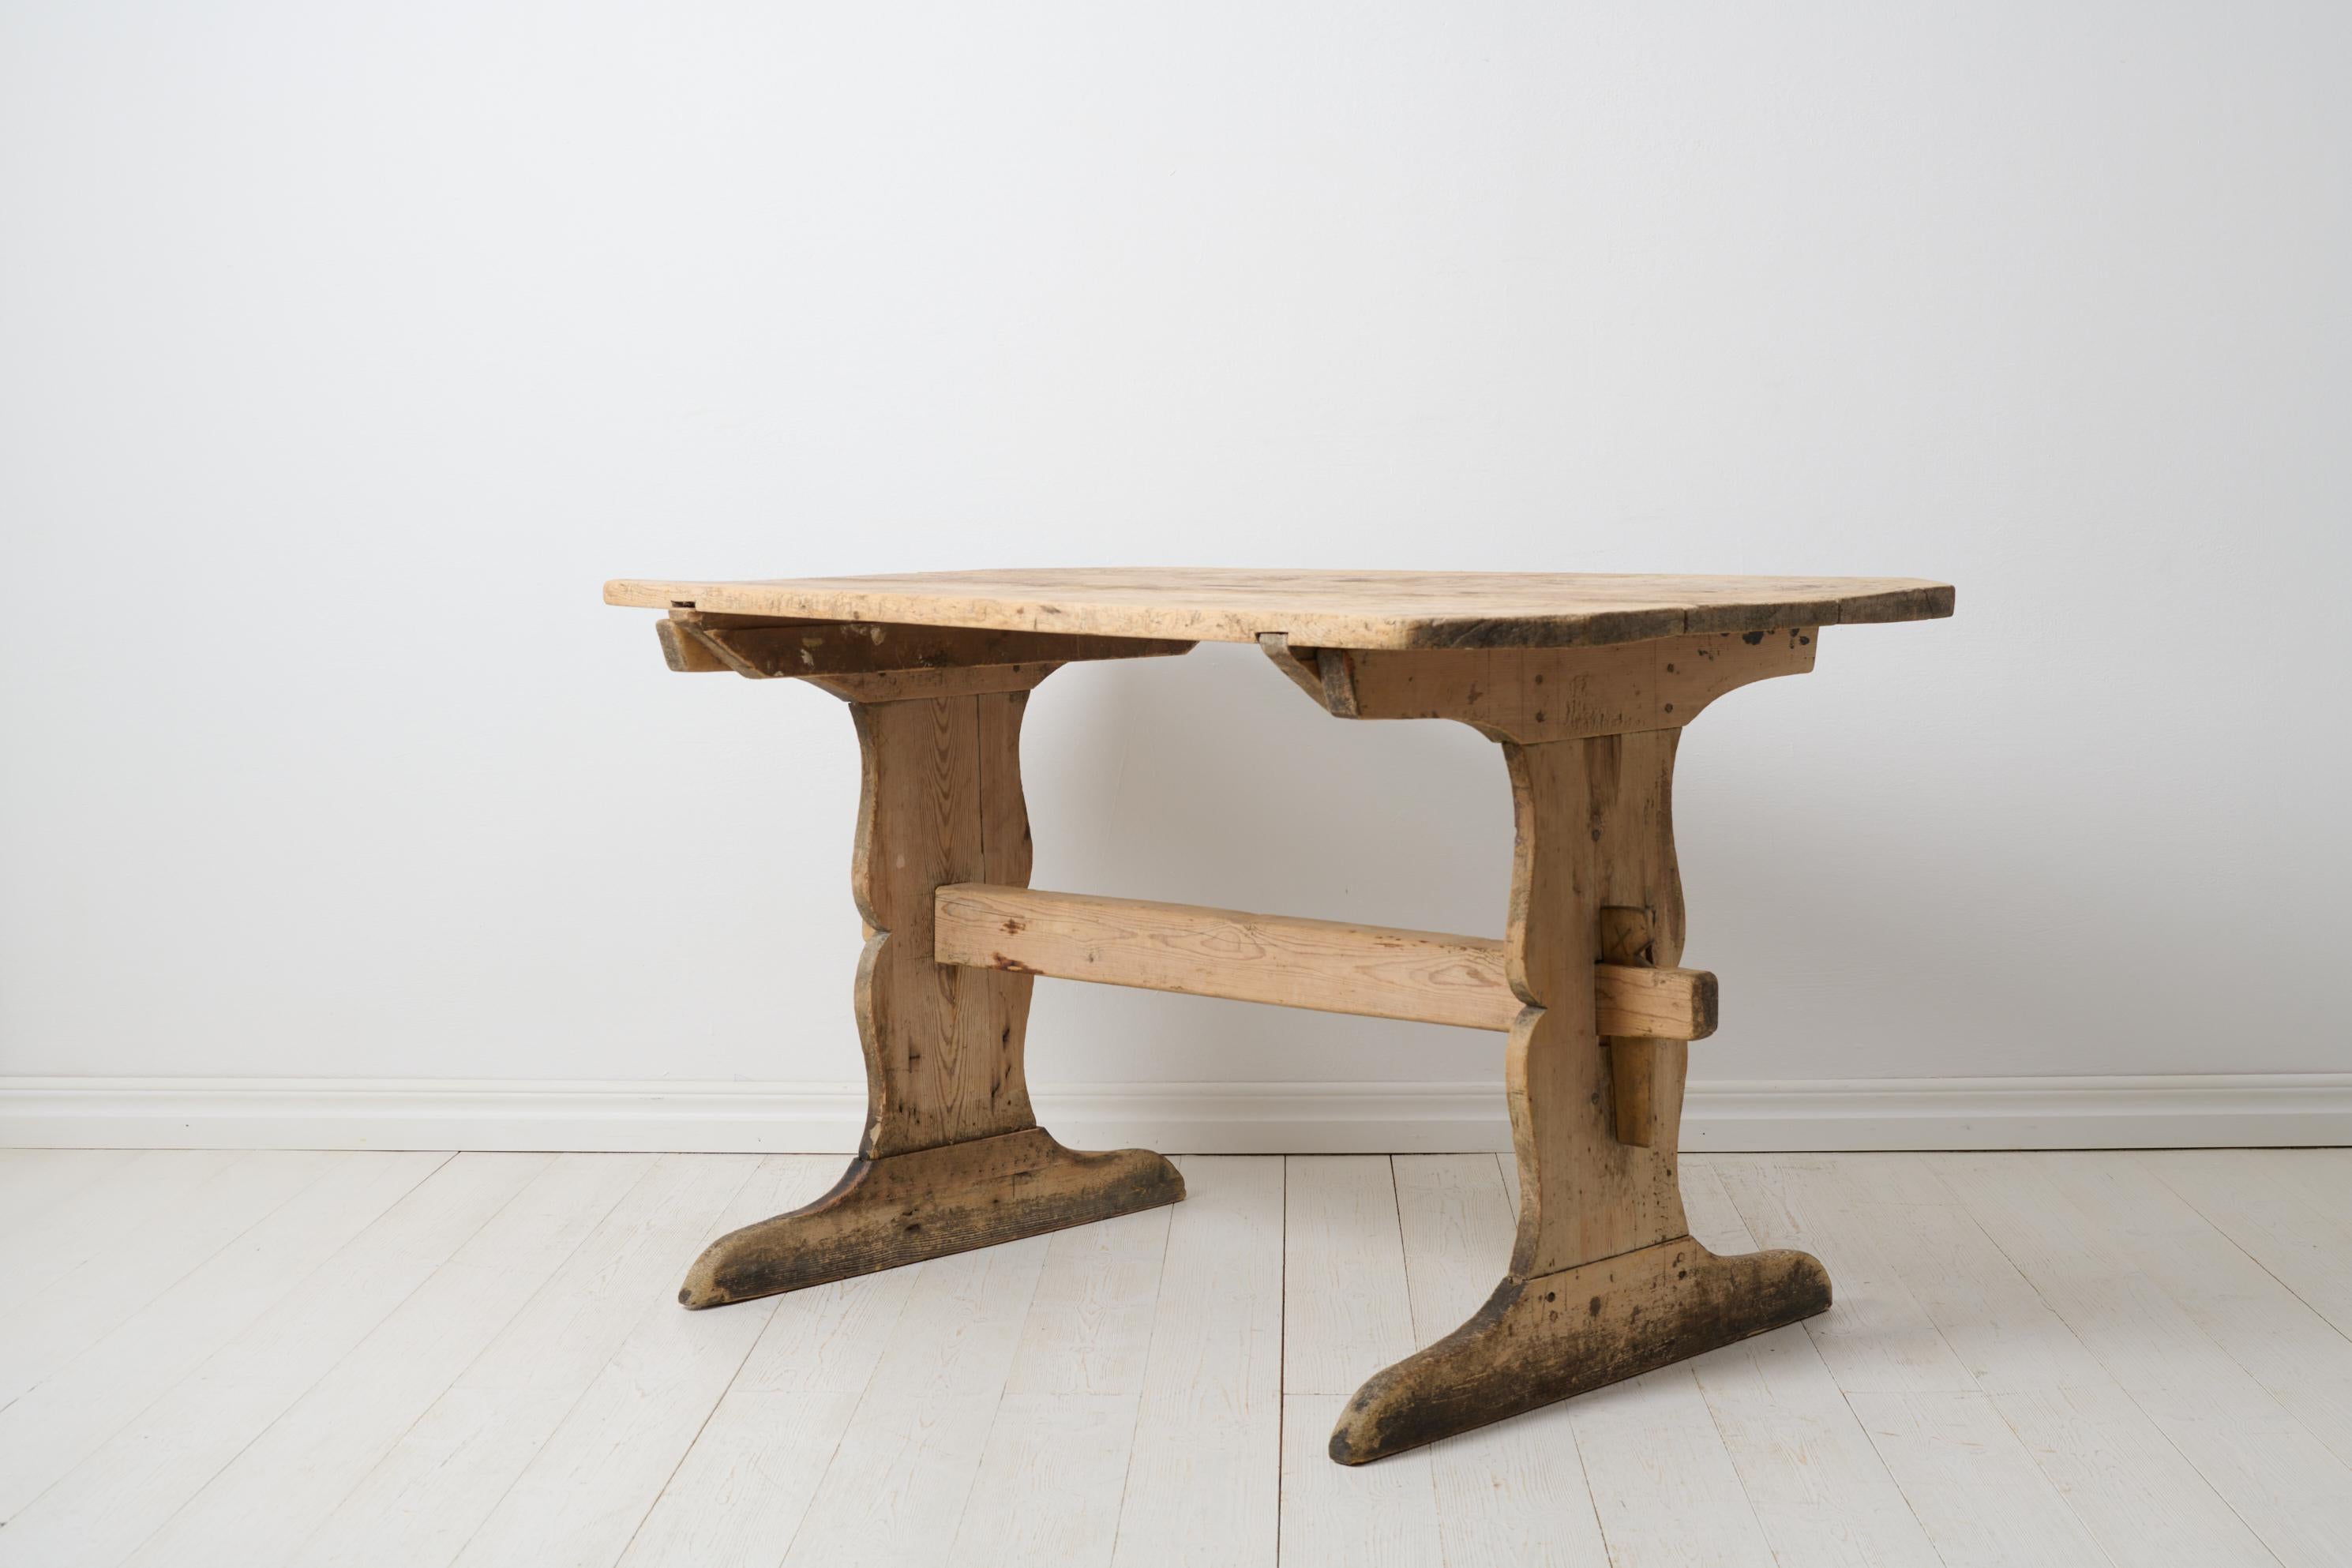 Antique country trestle table from northern Sweden made during the early 1800s. The table is a genuine antique and made by hand in solid pine. The construction is made completely without screws or nails. The table has never been painted and has a